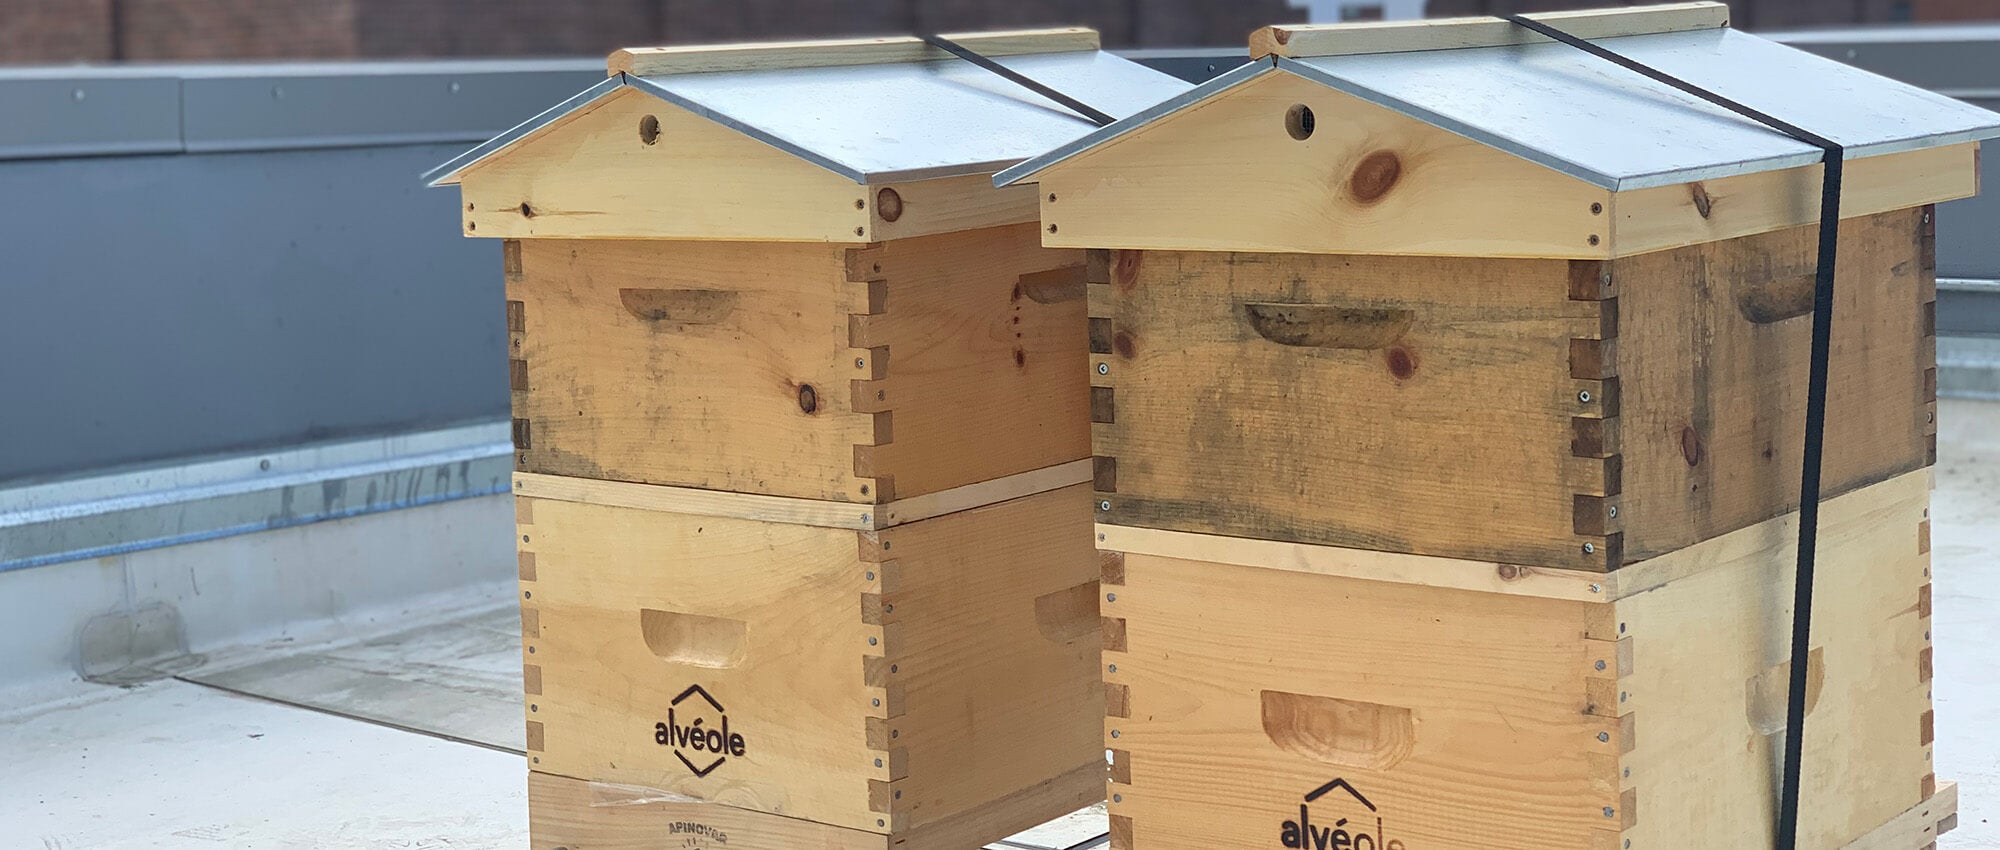 The Beehives present on the roof of Adaptive's Seattle HQ